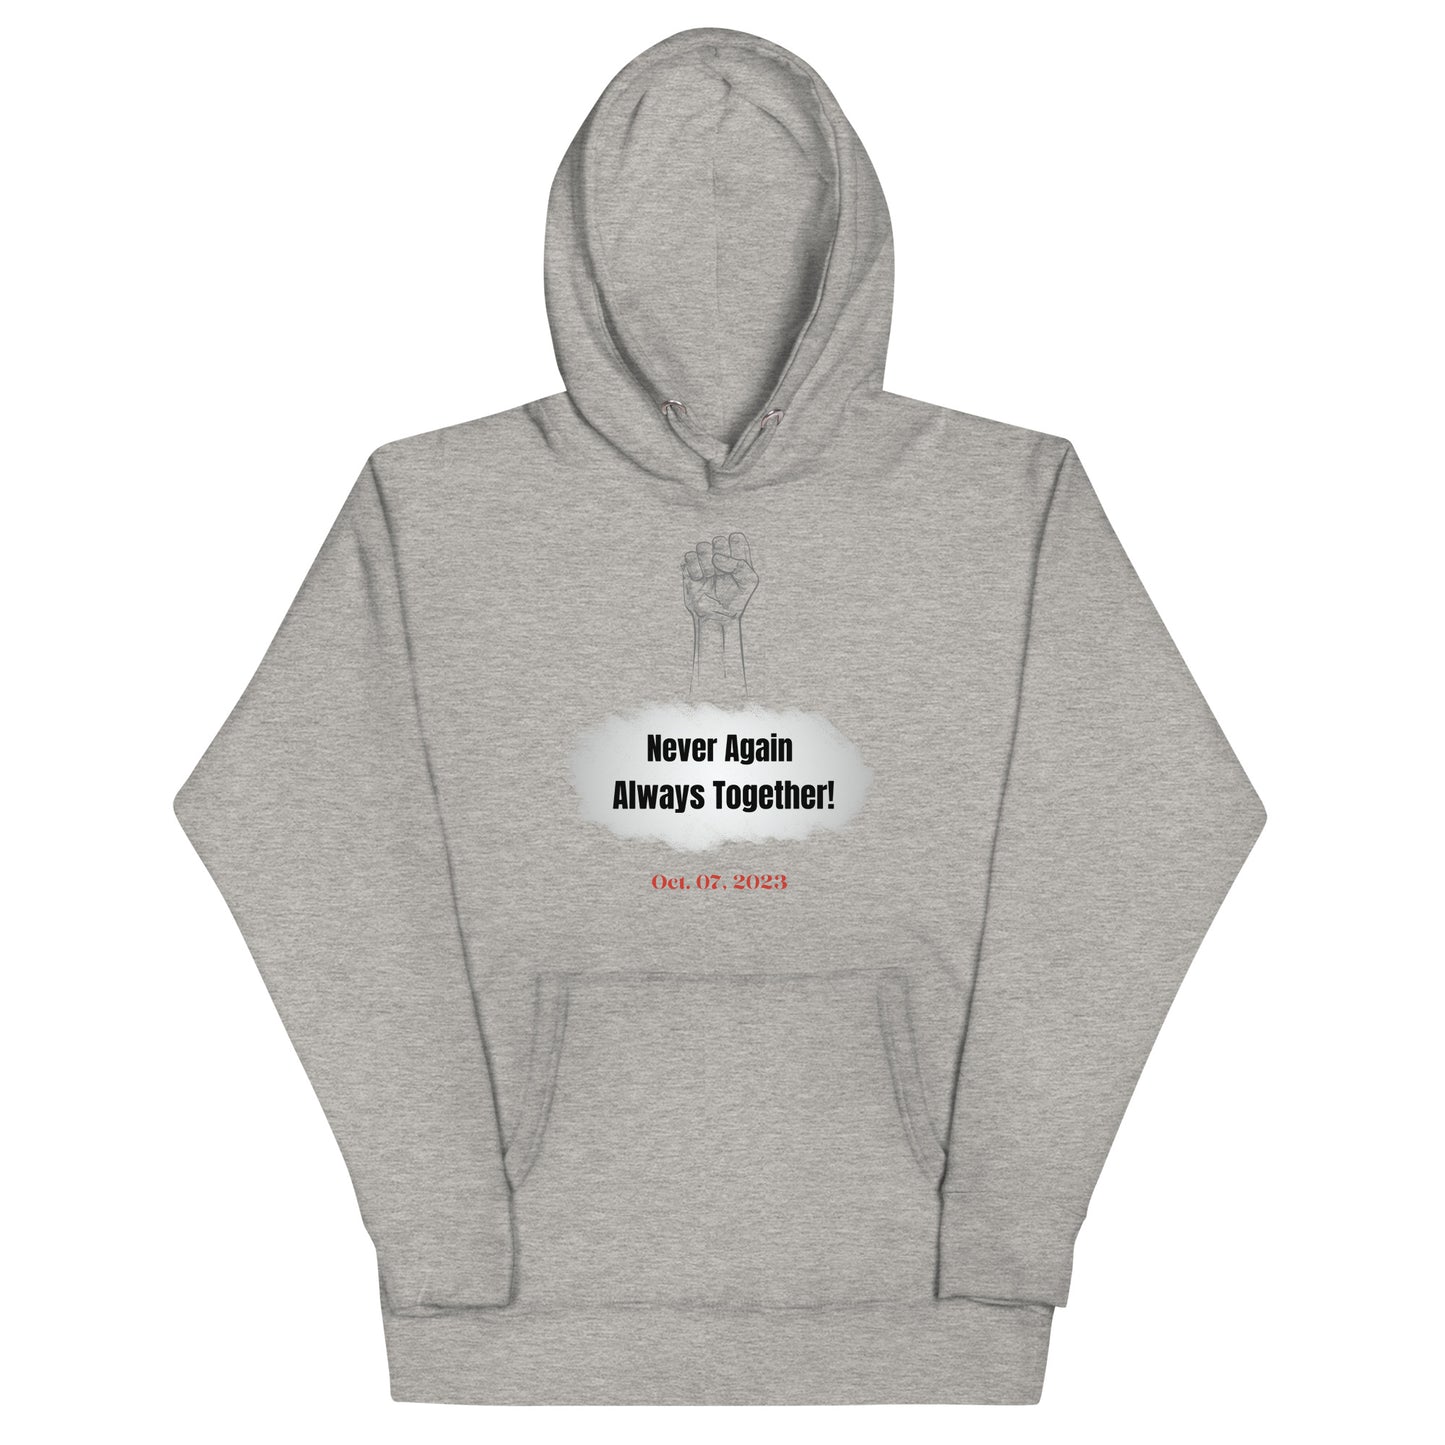 Never Again Always Together - Unisex Hoodie (6 colors)